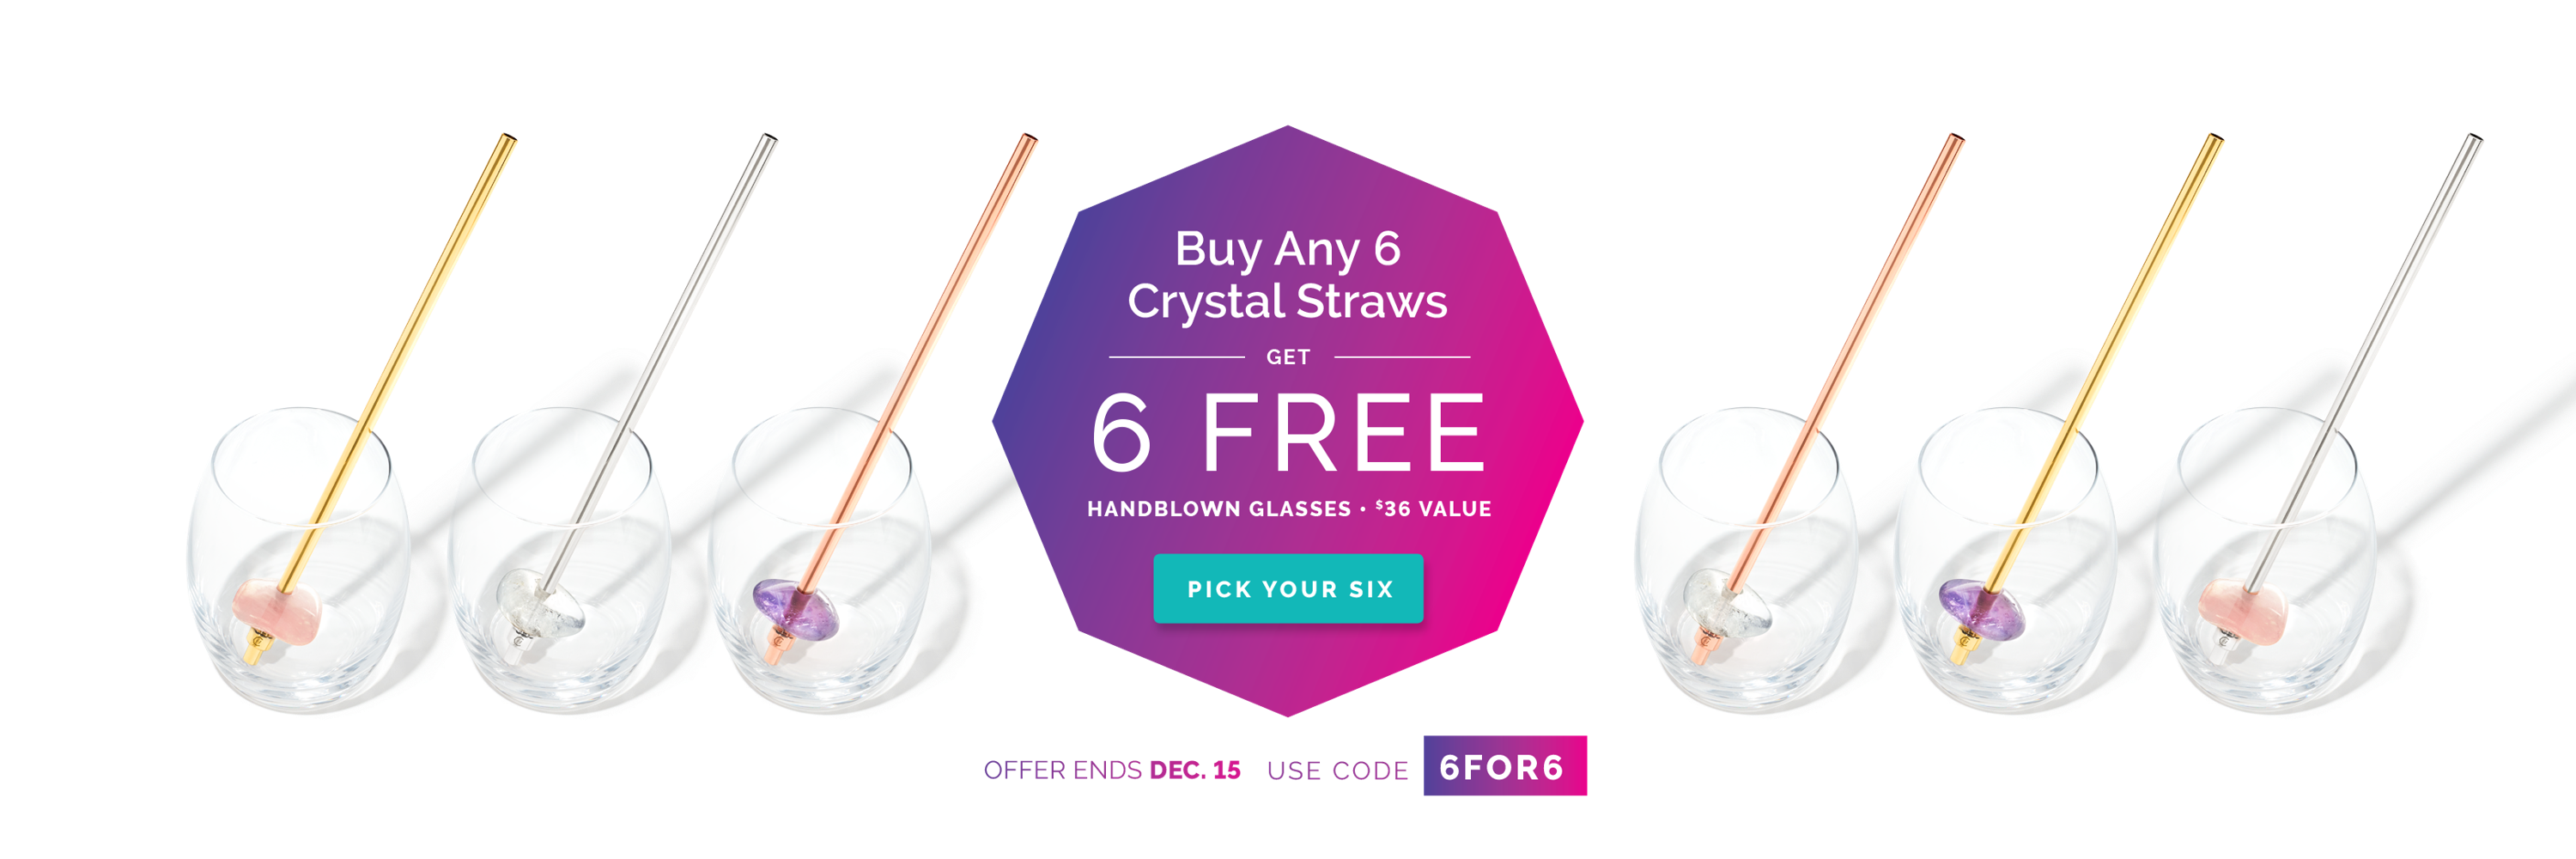 6 FREE GLASSES WITH PURCHASE OF ANY 6 STRAWS